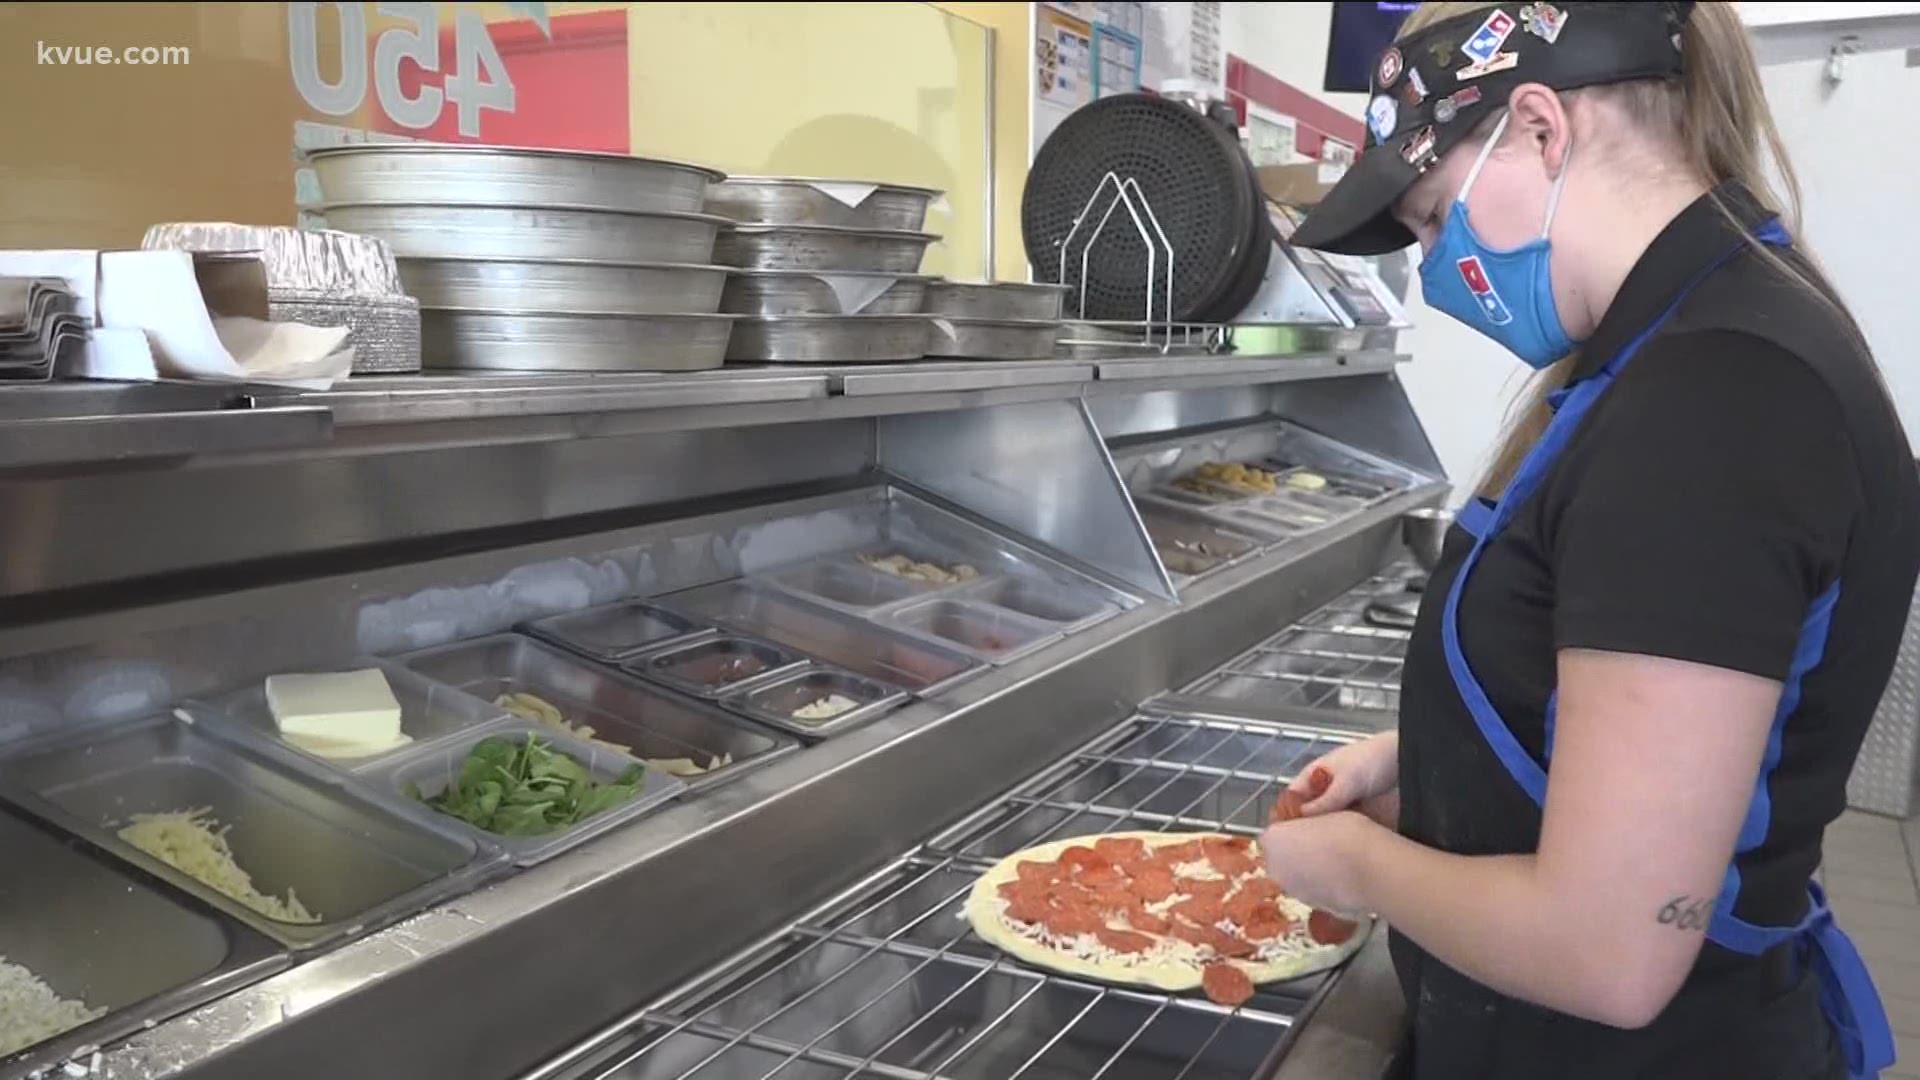 Austin's State-supported living center and Domino's Pizza have hundreds of openings in the Austin area.